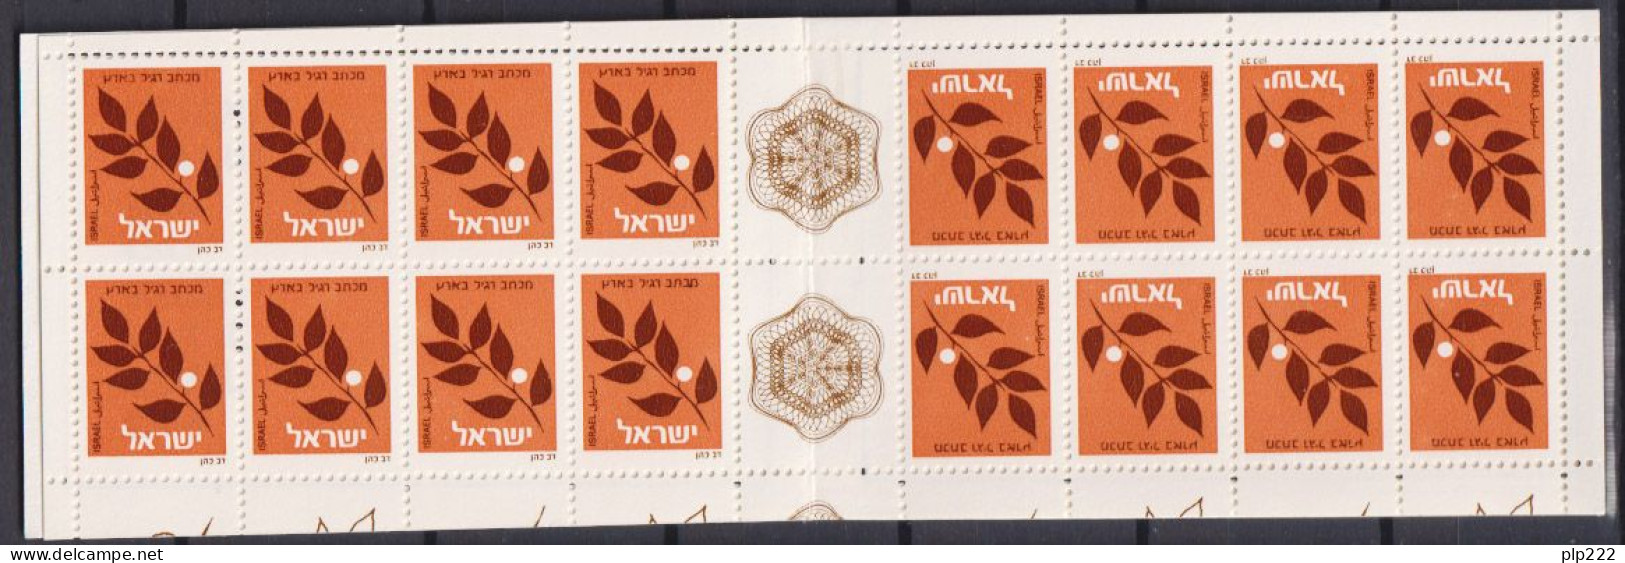 Israele 1982 Libretto / Booklet C836 **/MNH VF - Carnets